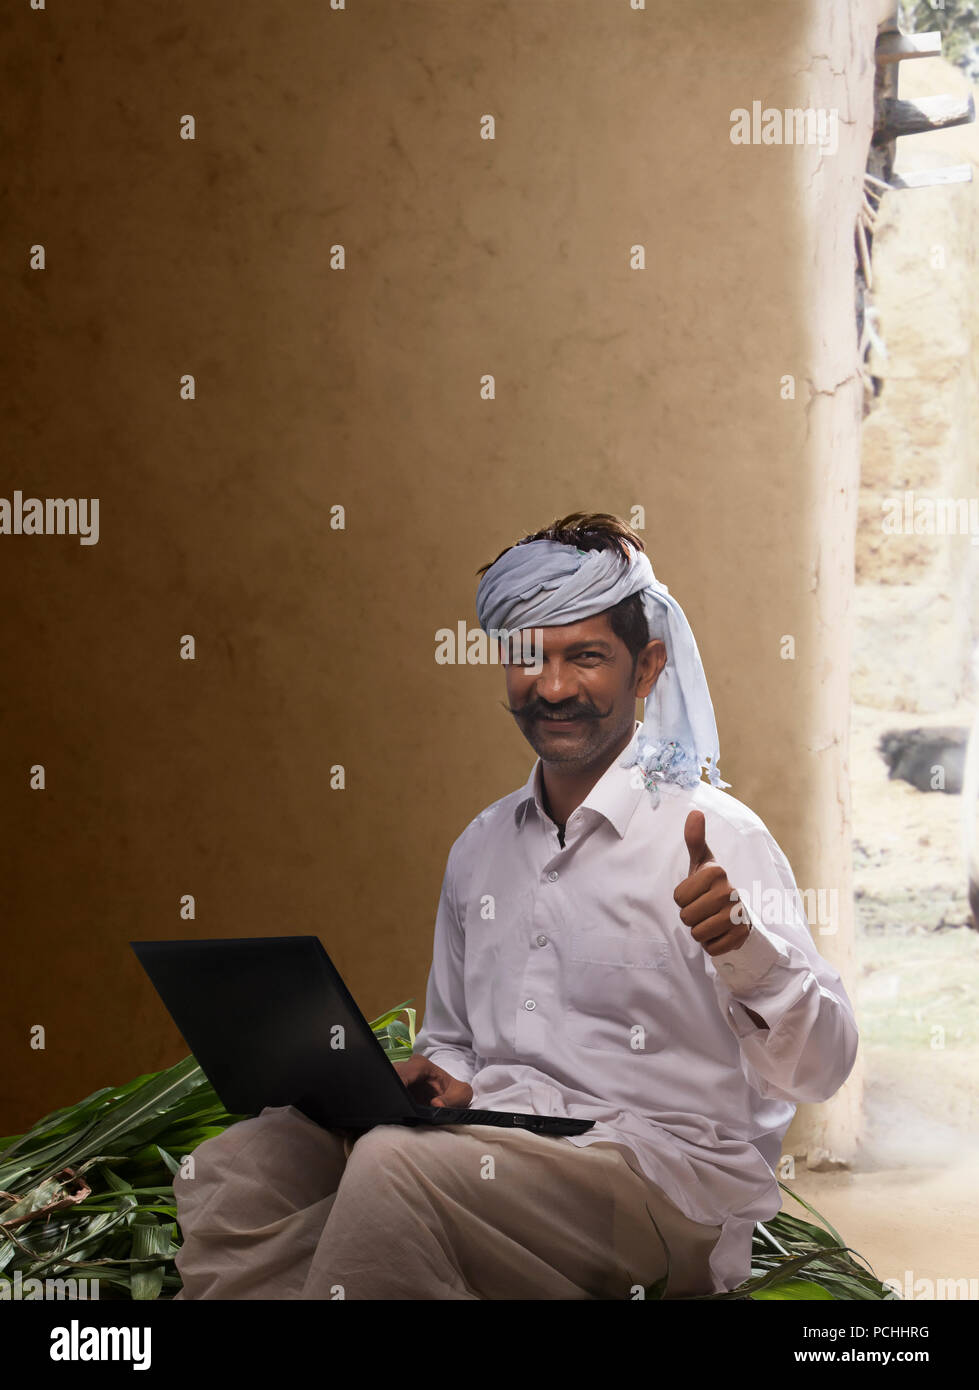 Rural farmer showing thumb up while working on laptop Stock Photo